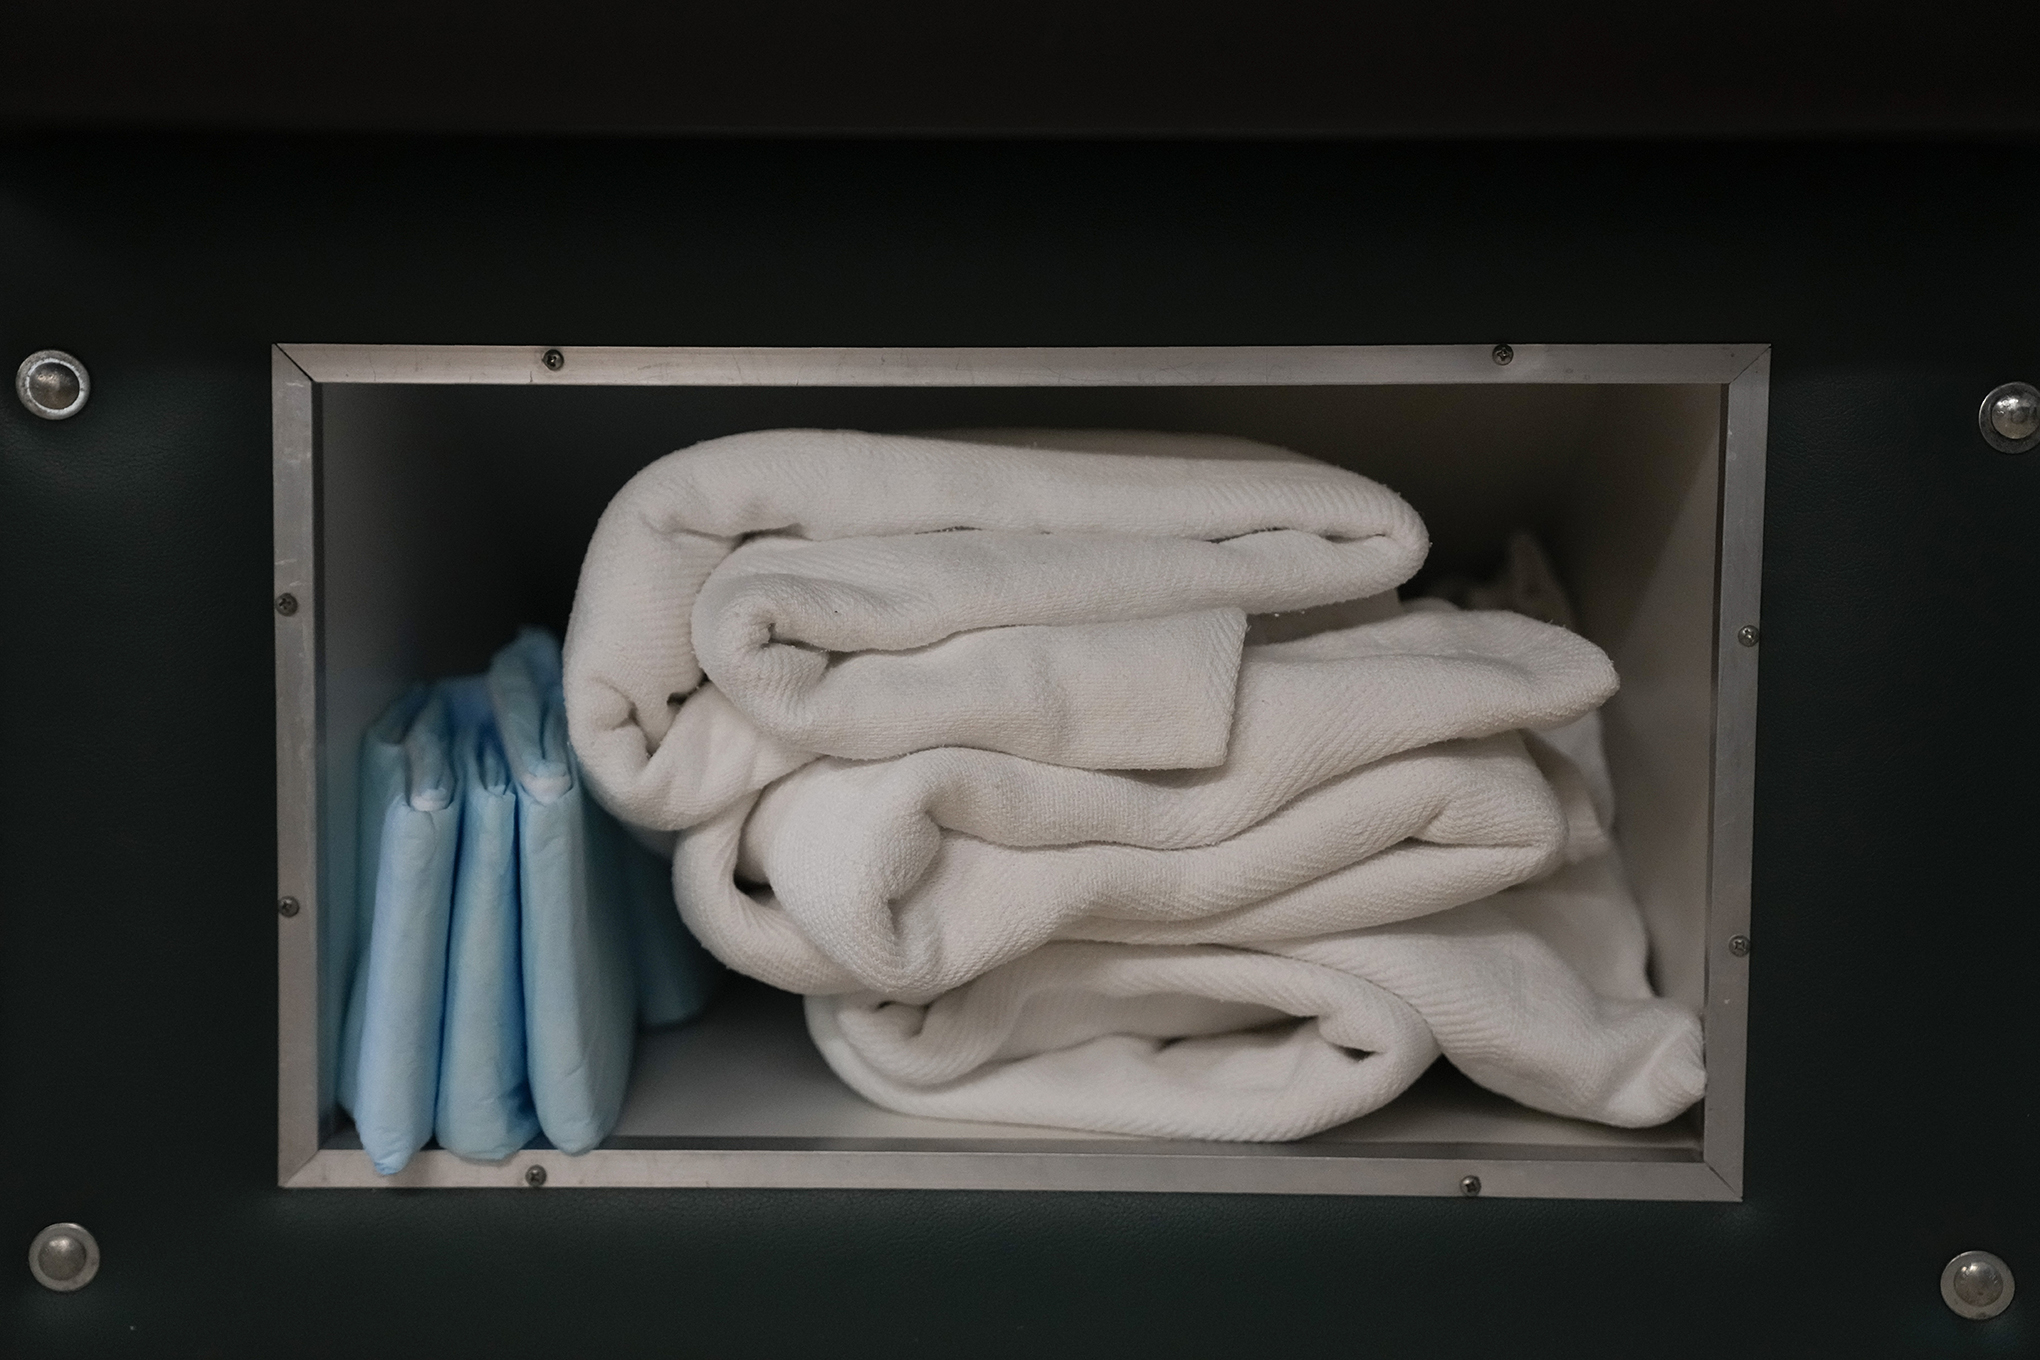 Extra blankets and pads are stored under a bed where women getting abortions